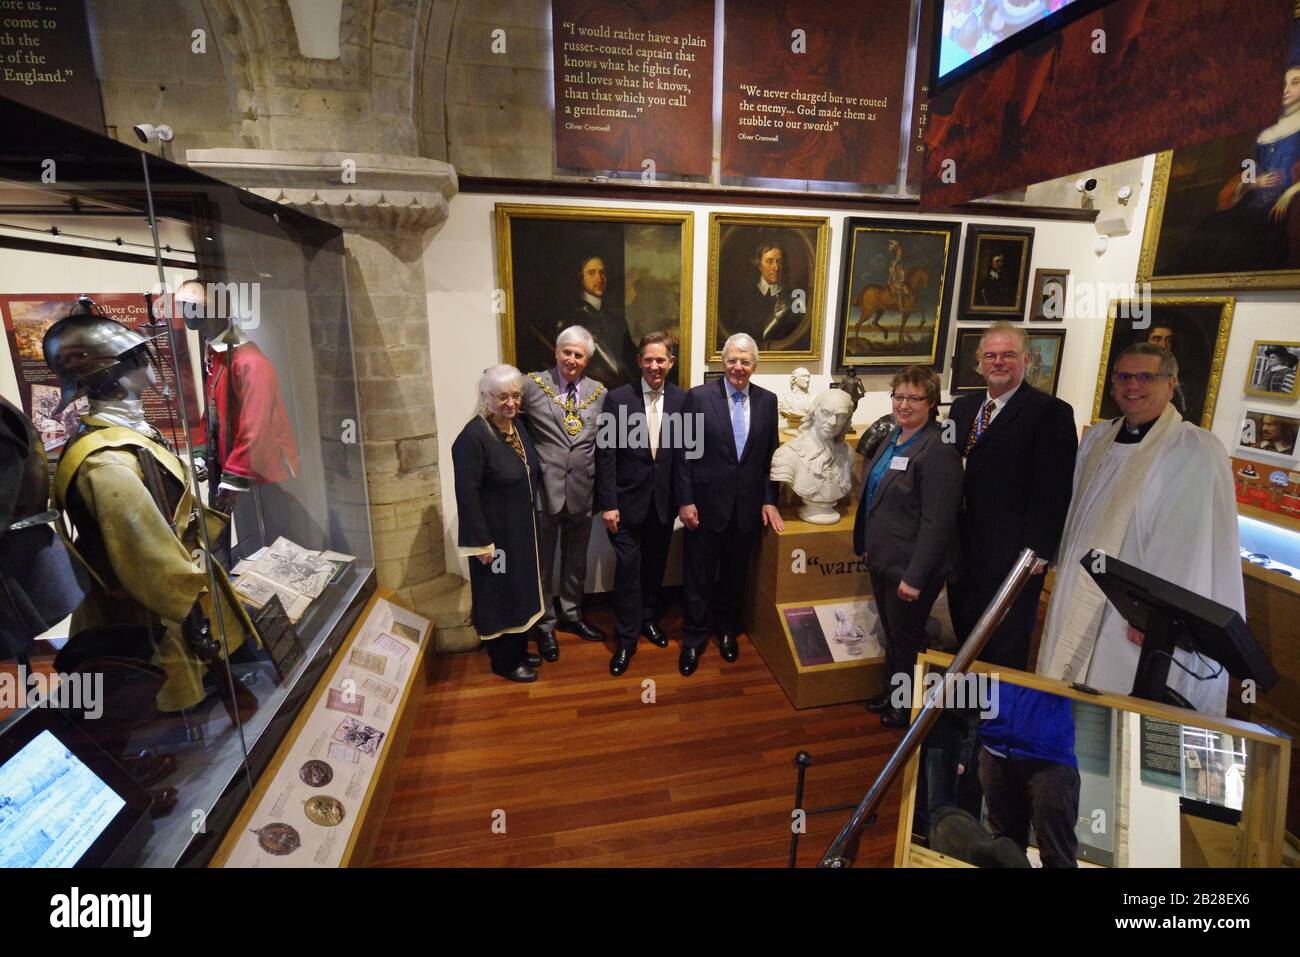 The Cromwell Museum in Huntingdon officially reopens tothe public on Sunday 1 March 2020 after an extensive refurbishment. A grand opening ceremony was  held at the Museum, with a march past by members of the Sealed Knot Society, before the official opening by the Patron of the Cromwell Museum Trust, the Rt. Hon Sir John Major KG CH. Thanks to grants totalling £160,000 an exciting new display has been created highlighting the Museum’s internationally important collections, to tell the story of Oliver Cromwell in a more engaging way. Stock Photo